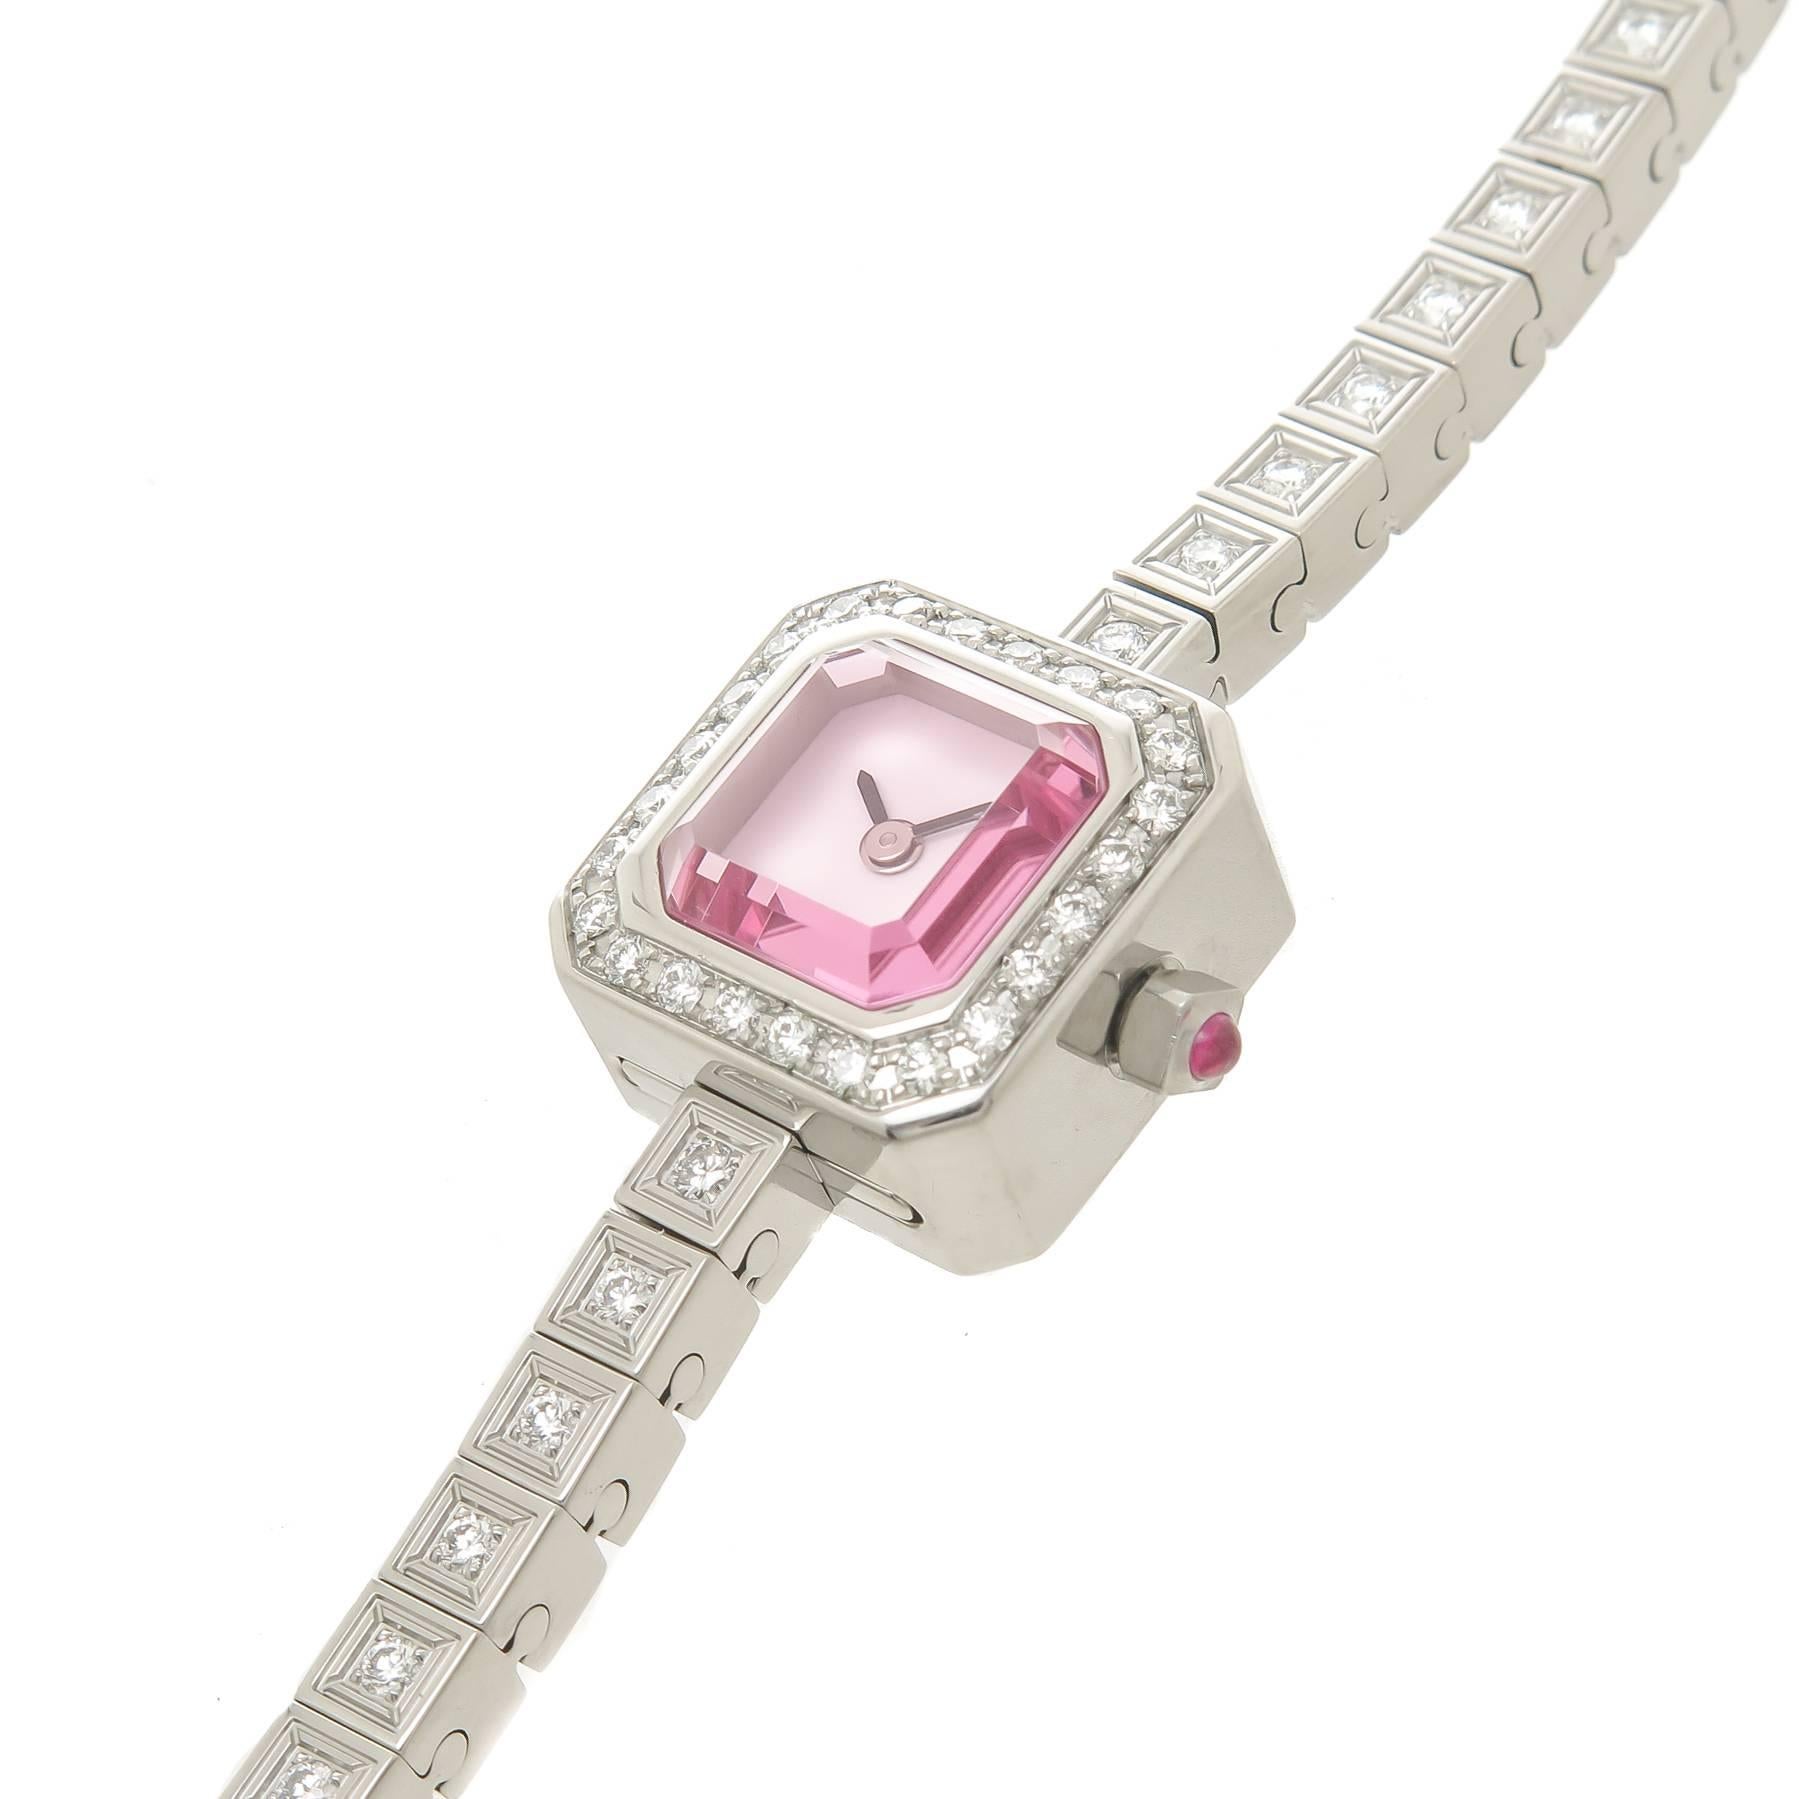 Circa 2012 Corum " Sugar Cube "  Ladies Wrist Watch, Stainless Steel Water Resistant case measuring 16 X 16 MM and 11 MM thick. Diamond set Bezel and Bracelet of Round Brilliant cut Diamonds totaling just over 1 Carat. Quartz Movement,